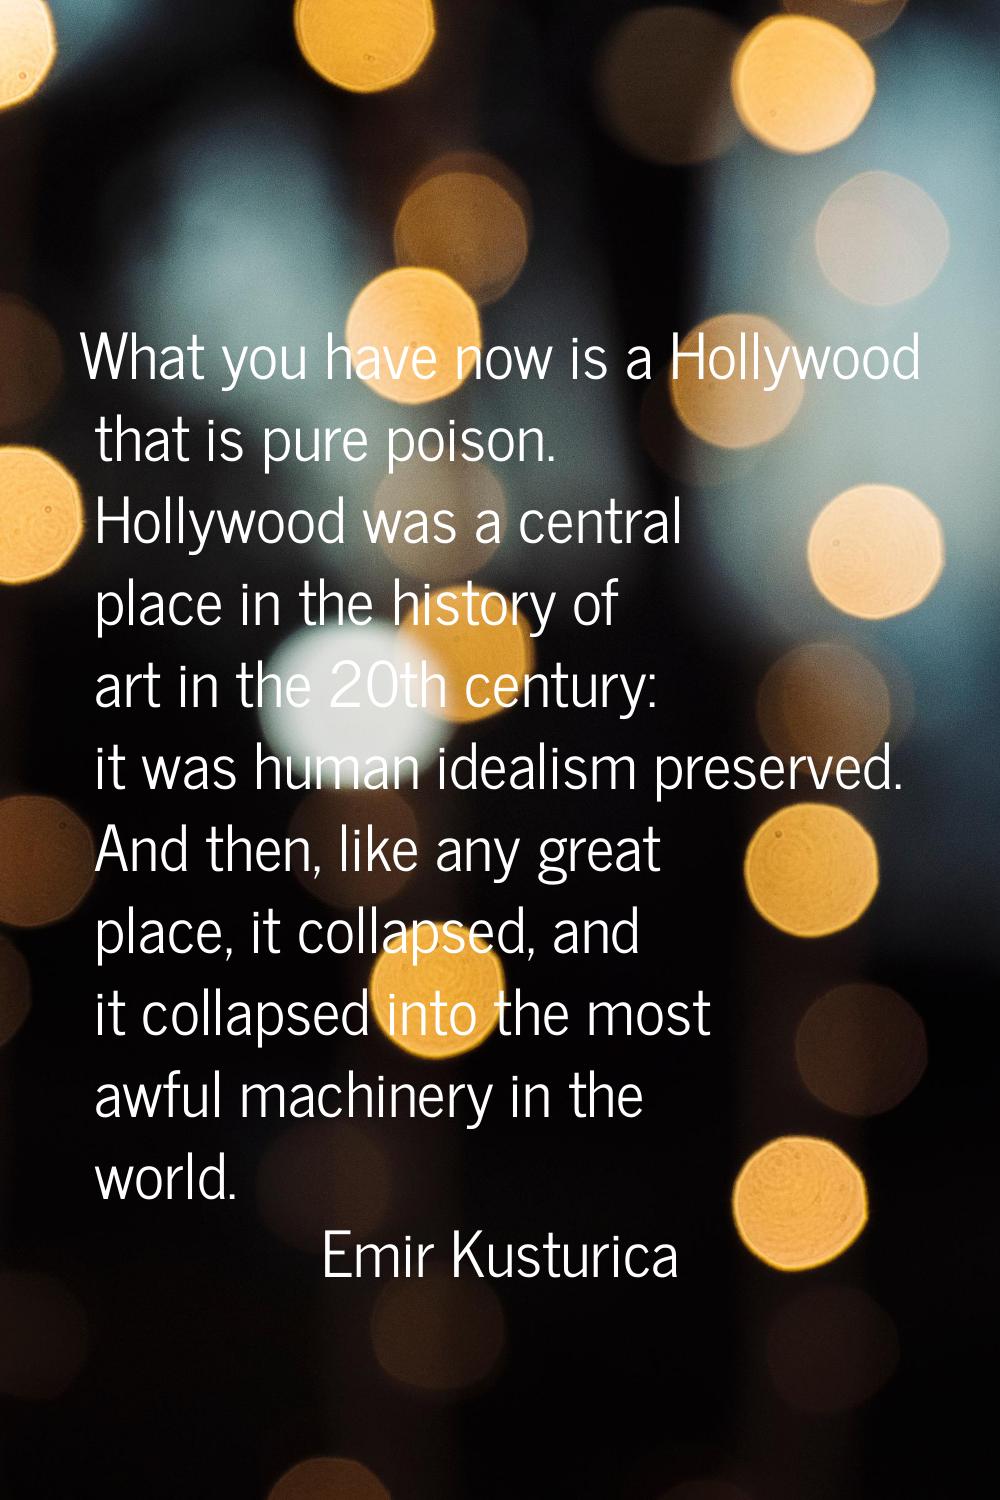 What you have now is a Hollywood that is pure poison. Hollywood was a central place in the history 